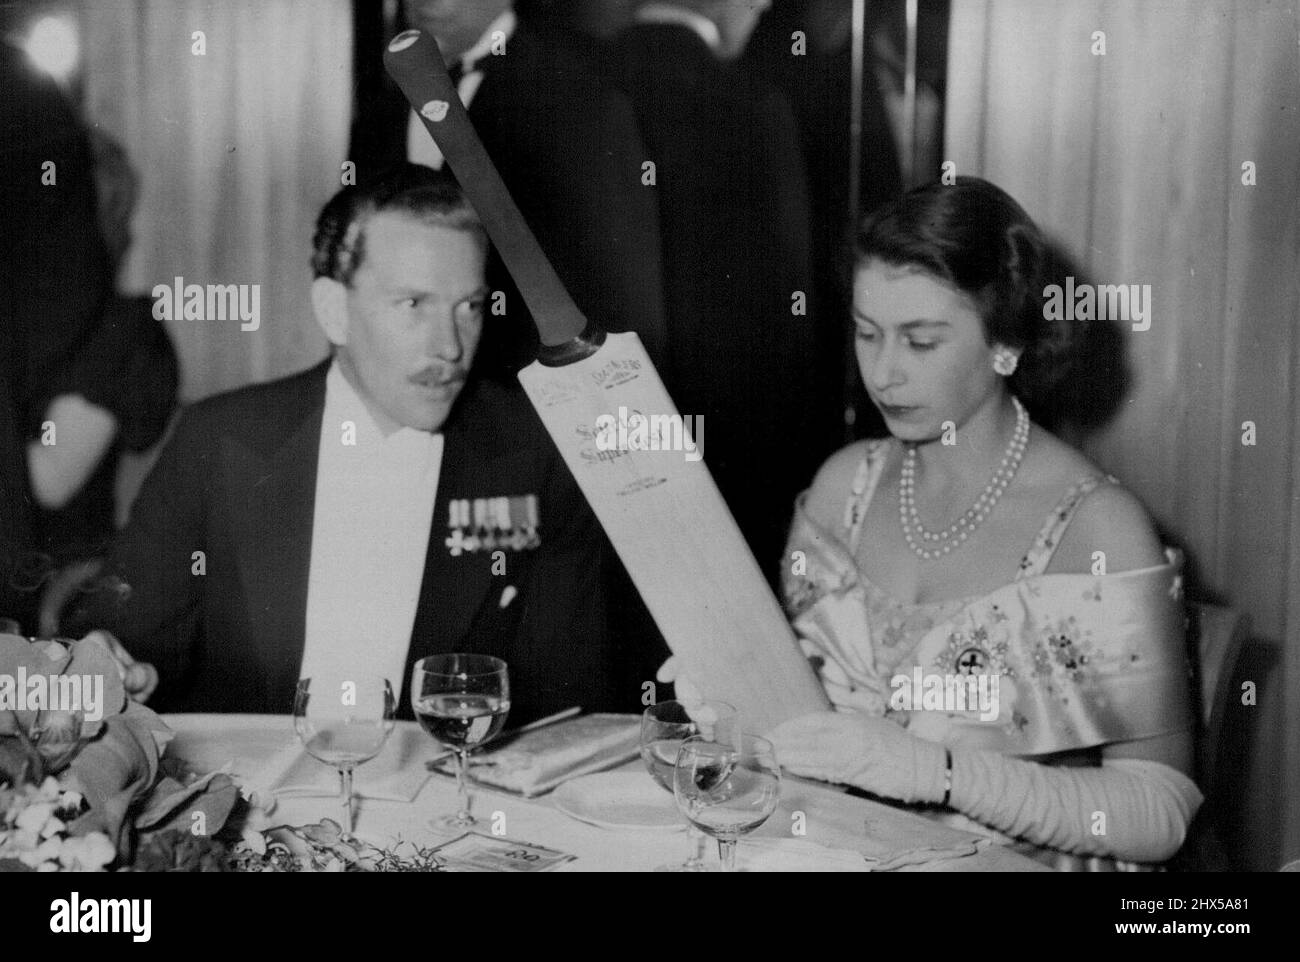 The Princess At The Ball - Princess Elizabeth with Major David Butters interested in a cricket bat which was later auctioned on behalf of the Association's funds. Among the guests 'received' by the Duke of Edinburgh at a ball at the Dorchester Hotel in aid of the National Playing Fields Association, of which he is President, was Princess Elizabeth. The Princess, wore the emblem of the Order of the Garter on an off-the-shoulder gown in off-white, embroidered with raised blue crystal beads. April 21, 1949. Stock Photo